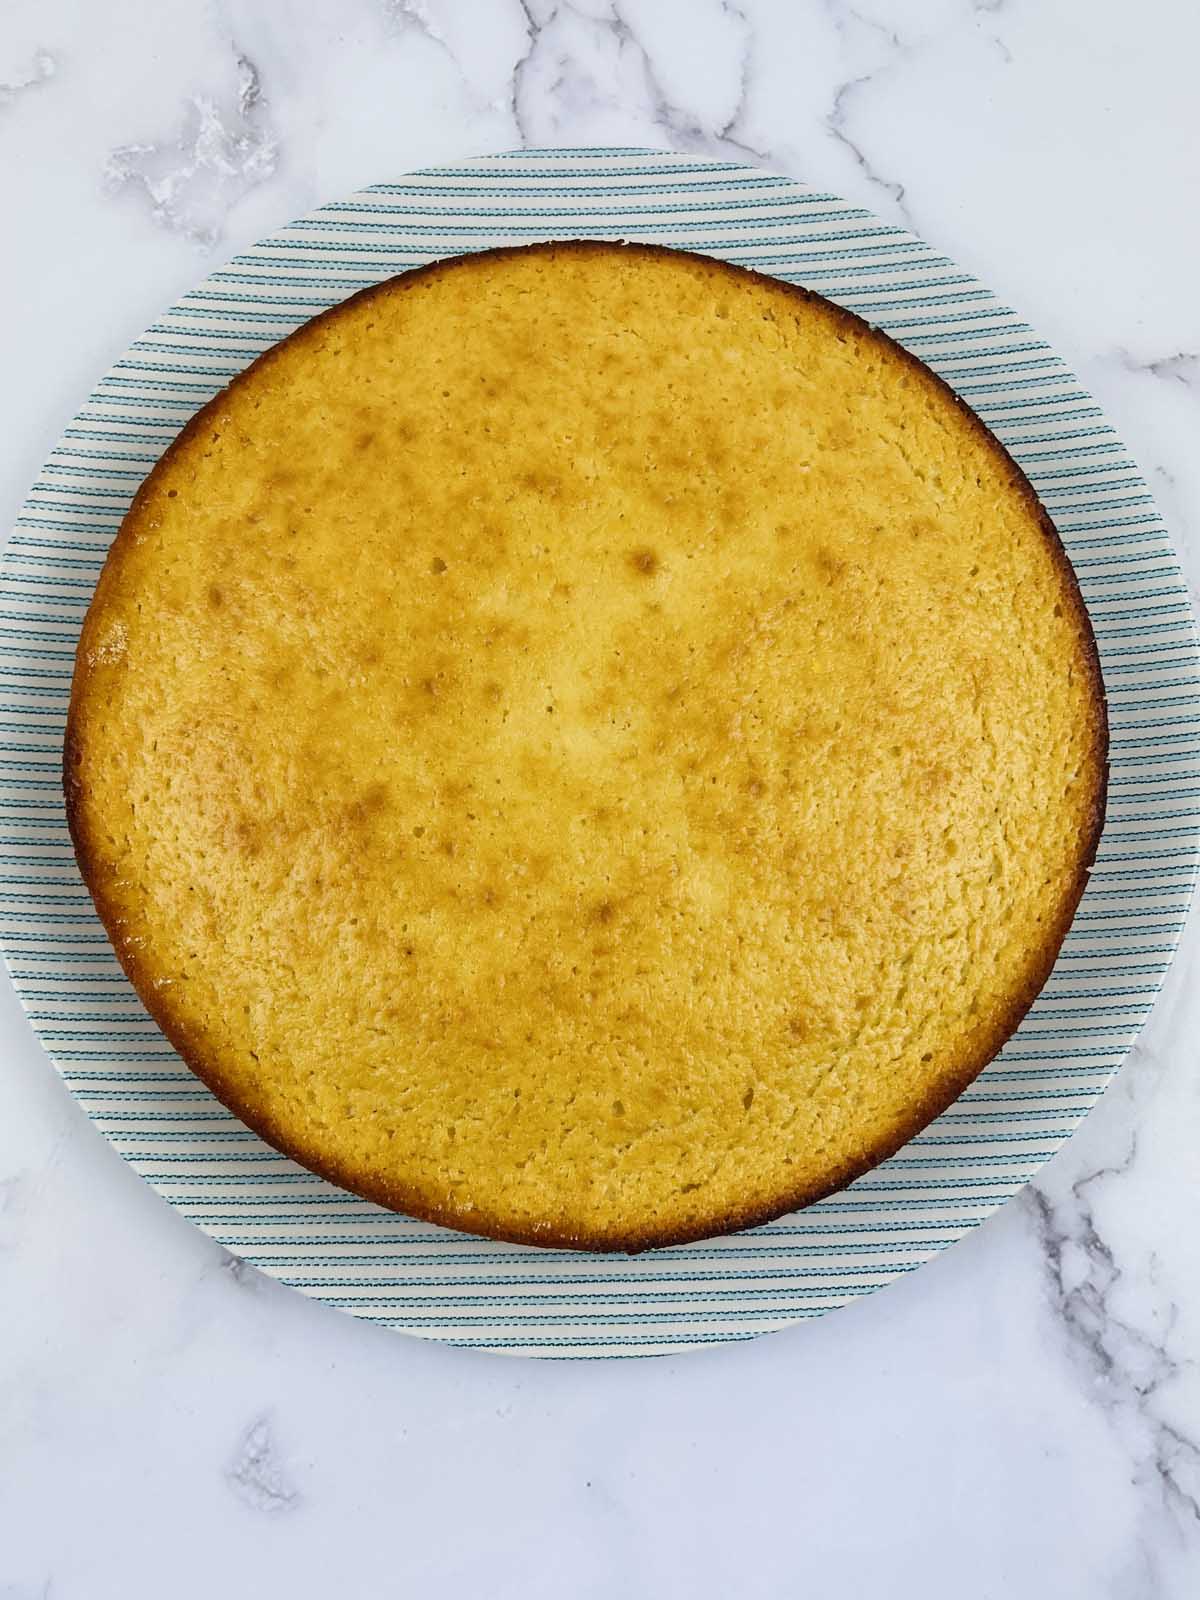 A baked cake on a plate.